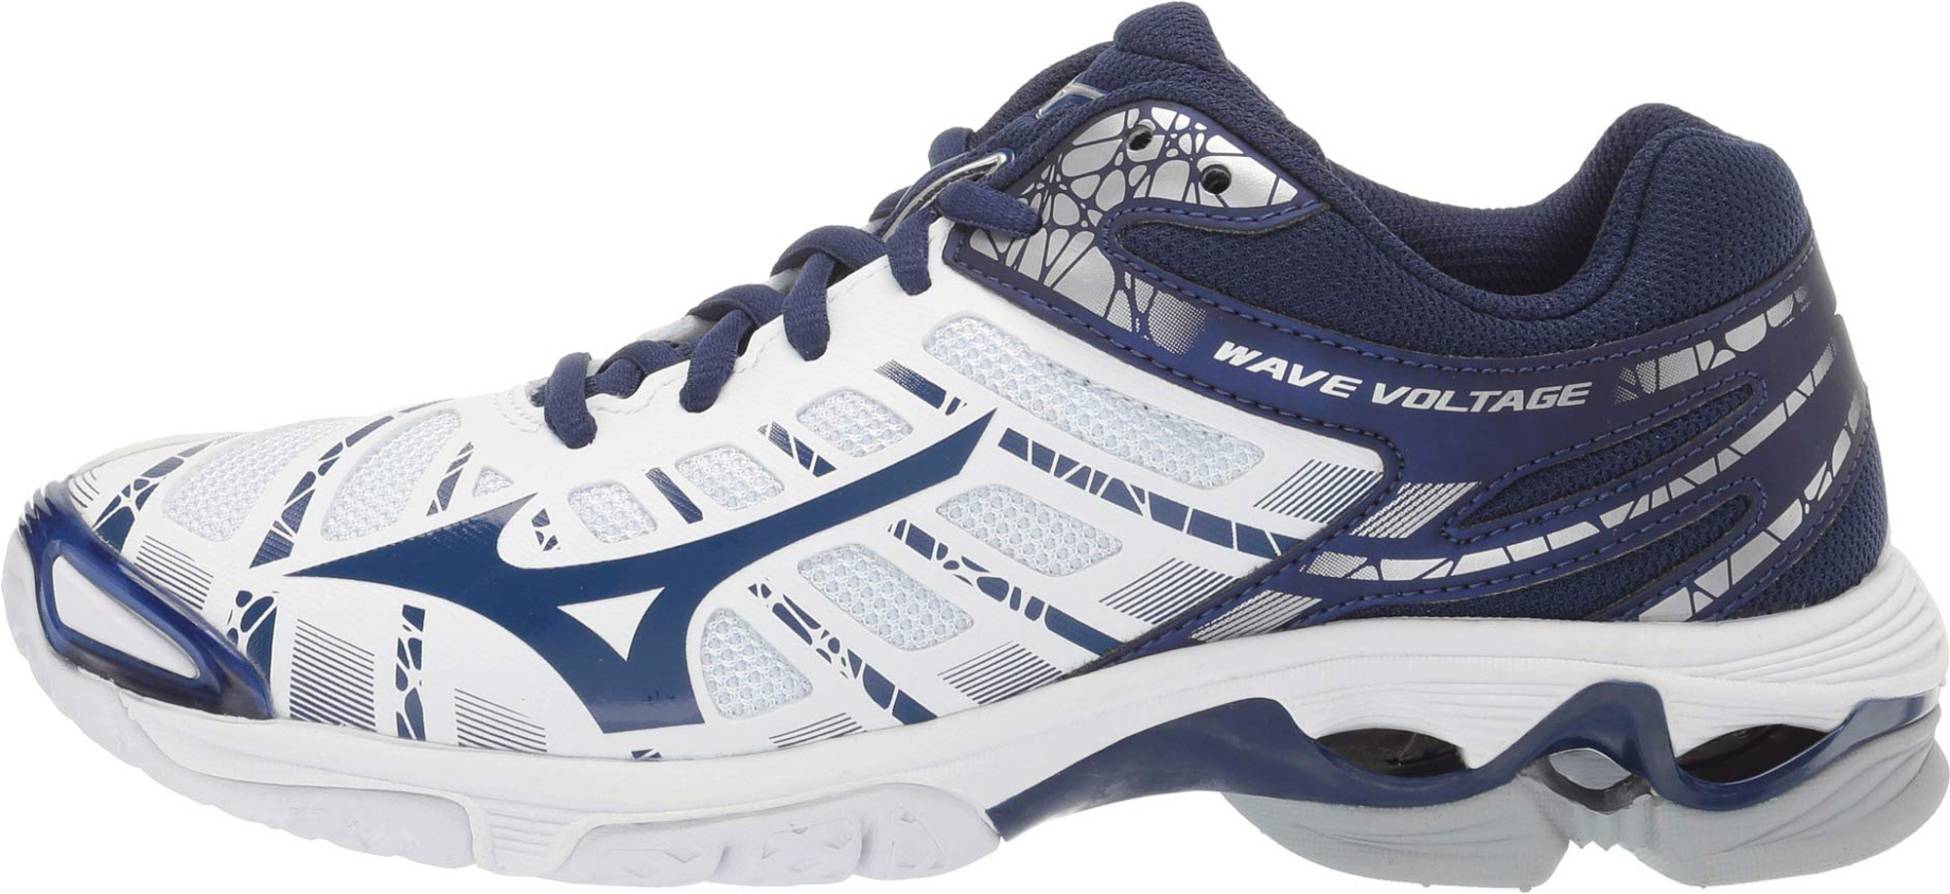 Only $82 + Review of Mizuno Wave Voltage | RunRepeat